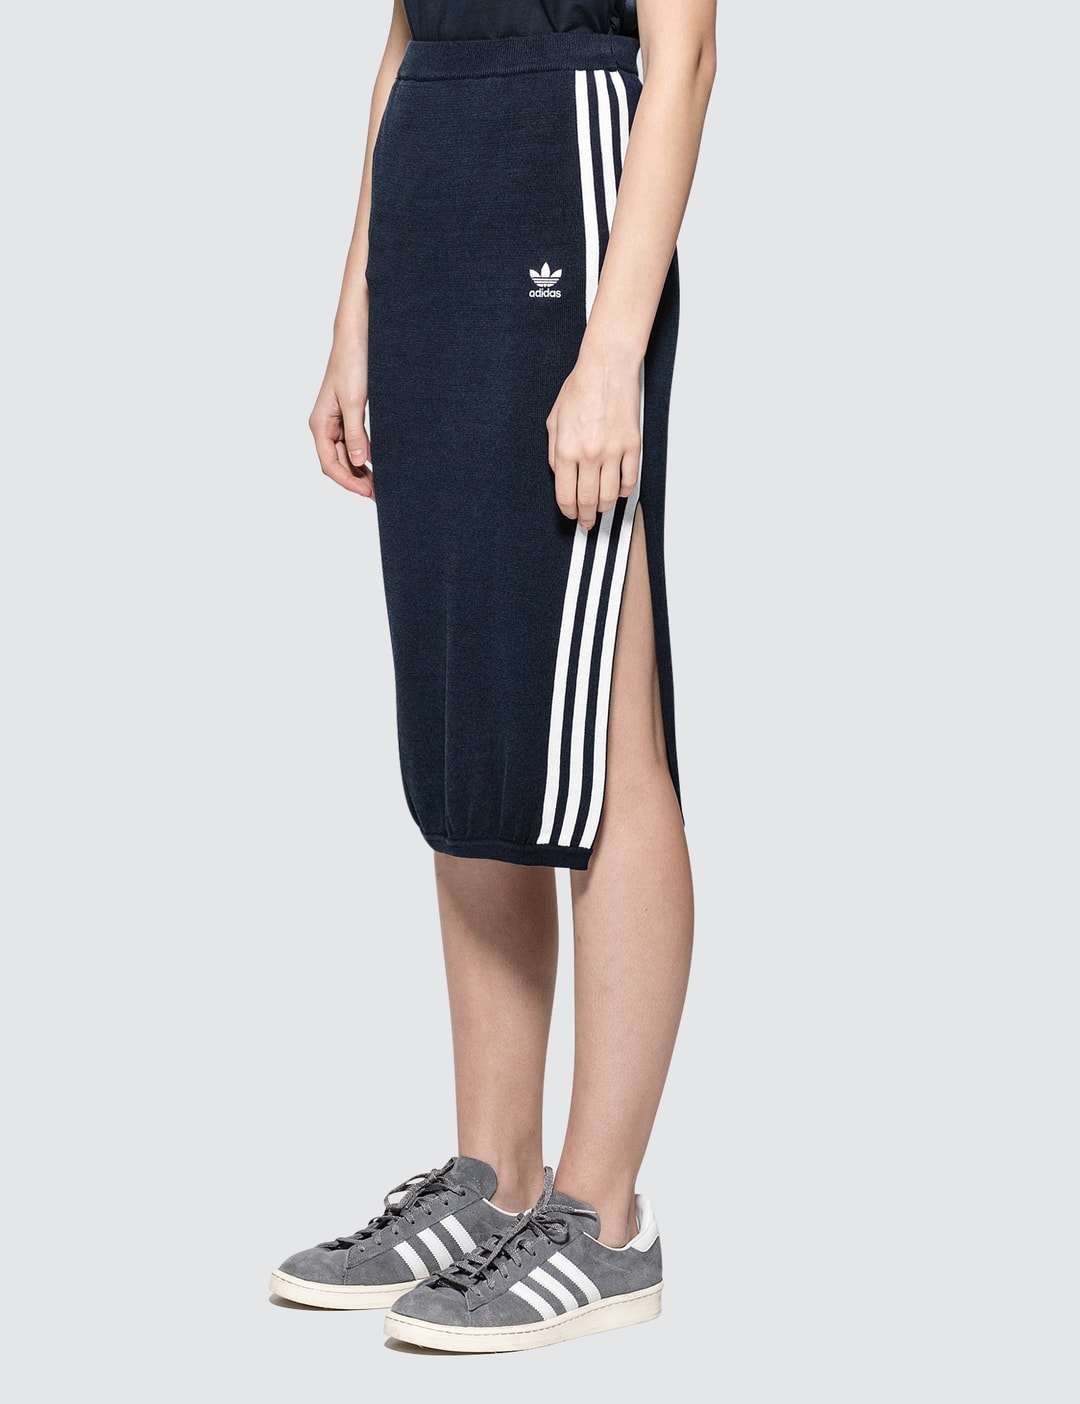 Adidas Originals - 3 STR Skirt | HBX - Globally Curated Fashion and ...